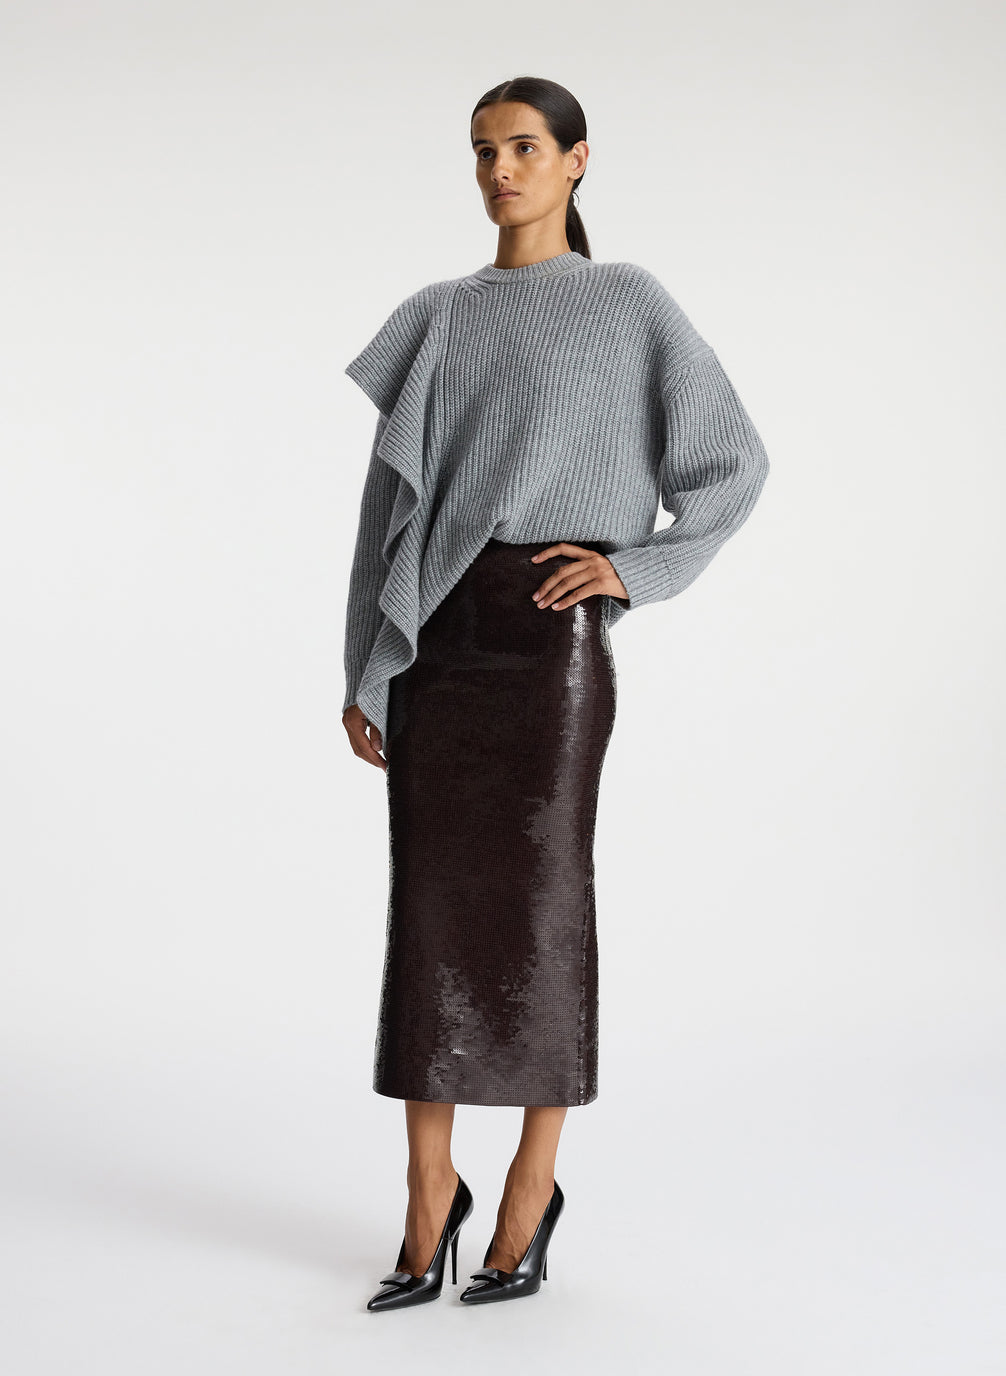 side view of woman wearing grey sweater with ruffle and brown sequin midi skirt